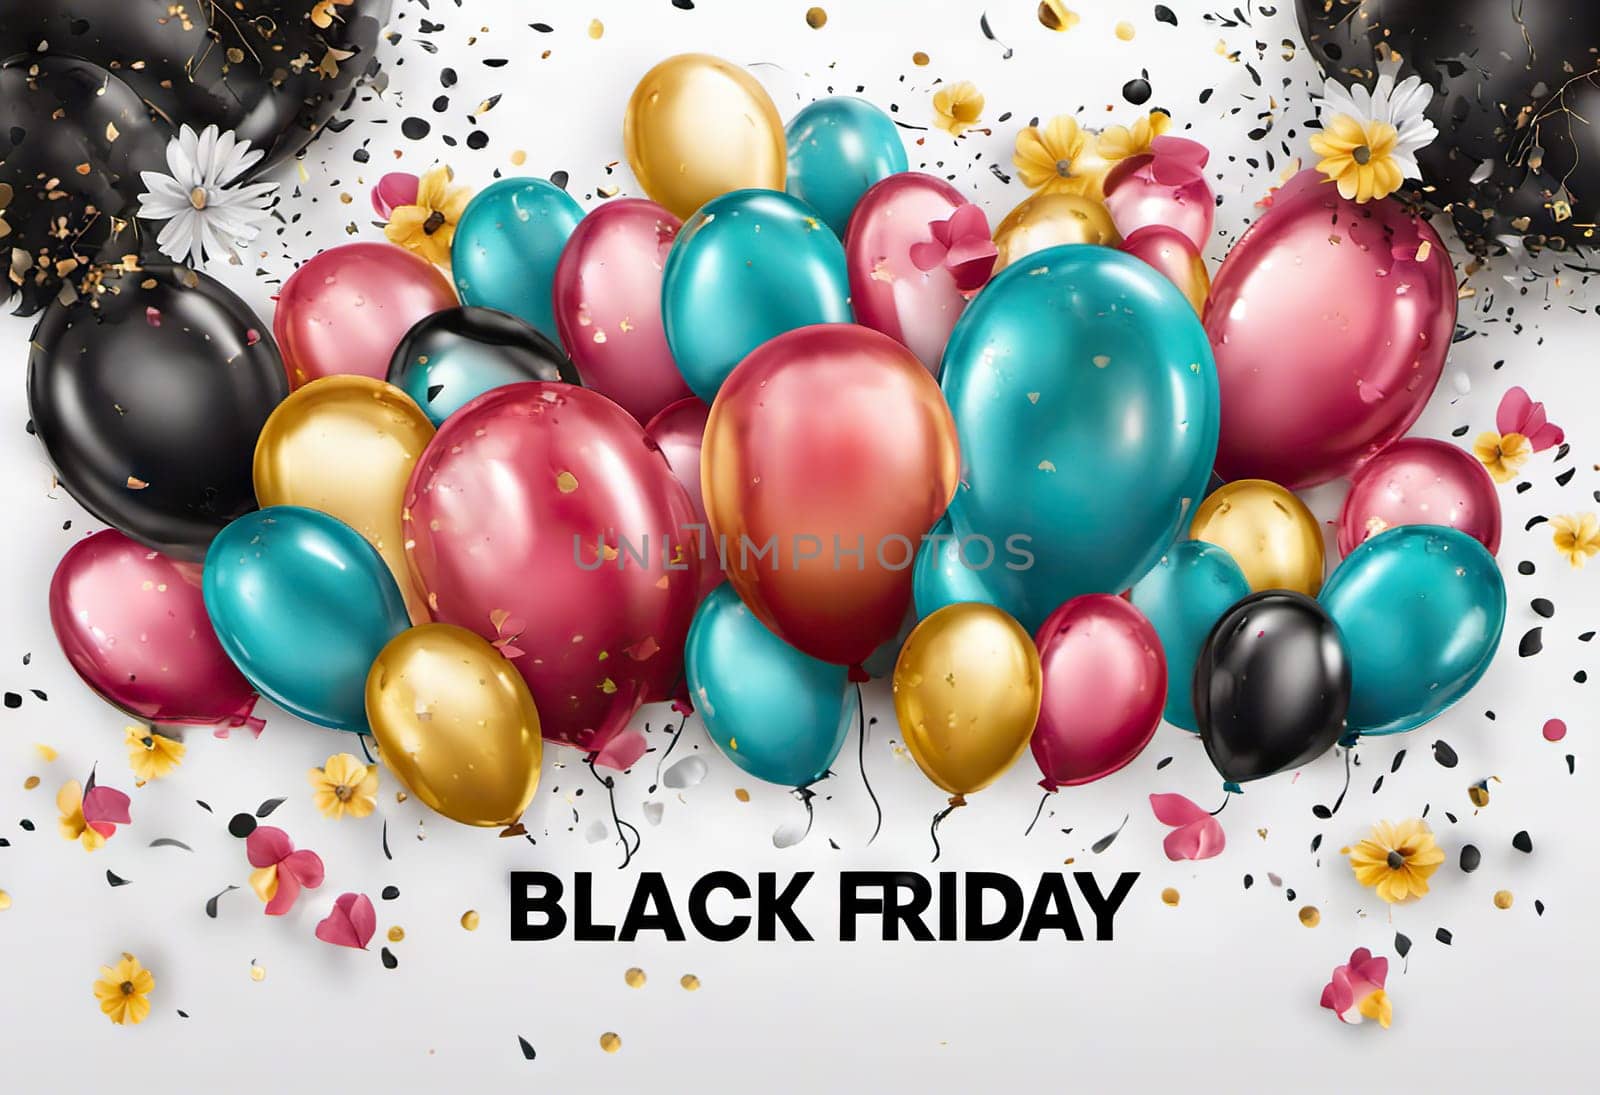 balloons and flowers with confetti on the background, the concept of gifts holidays and sales, black friday